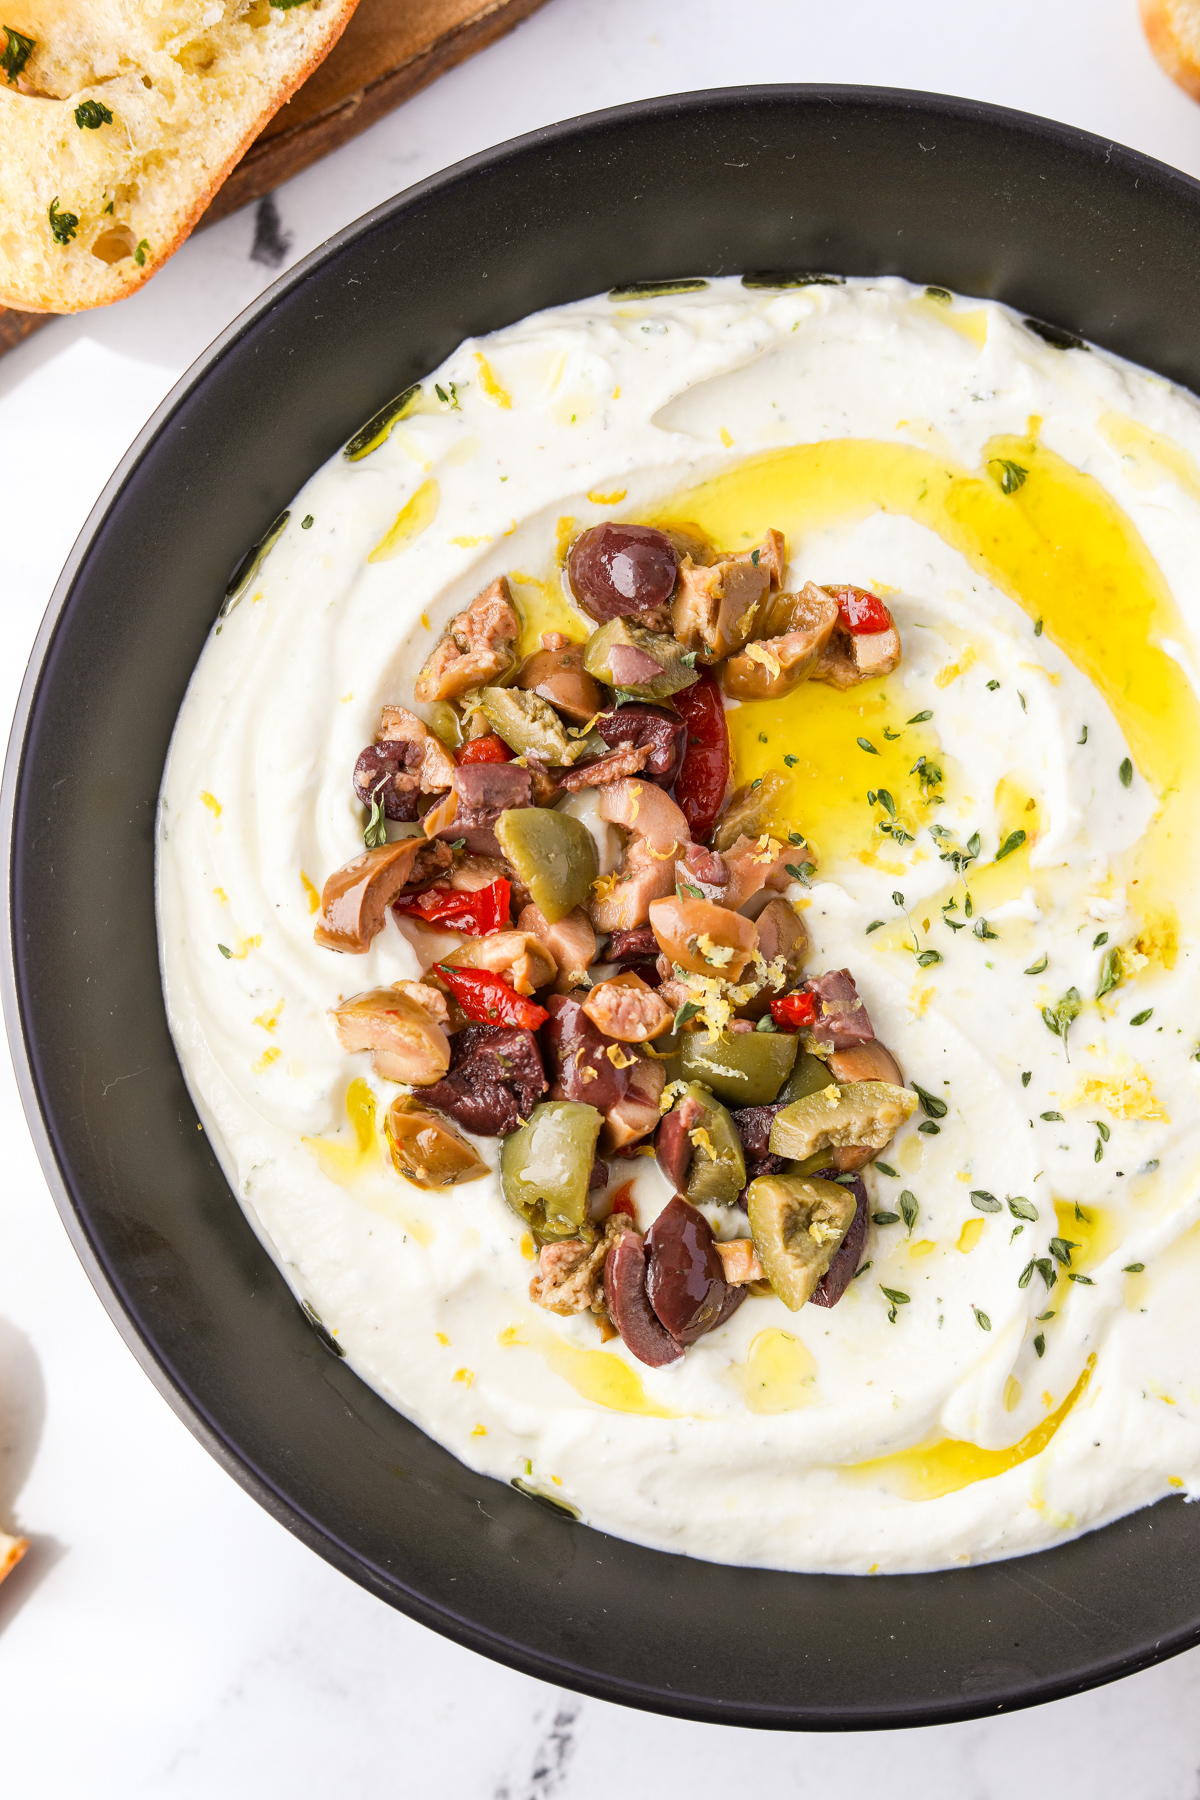 A bowl with a cheesy dip inside, garnished with greek olives and olive oil.